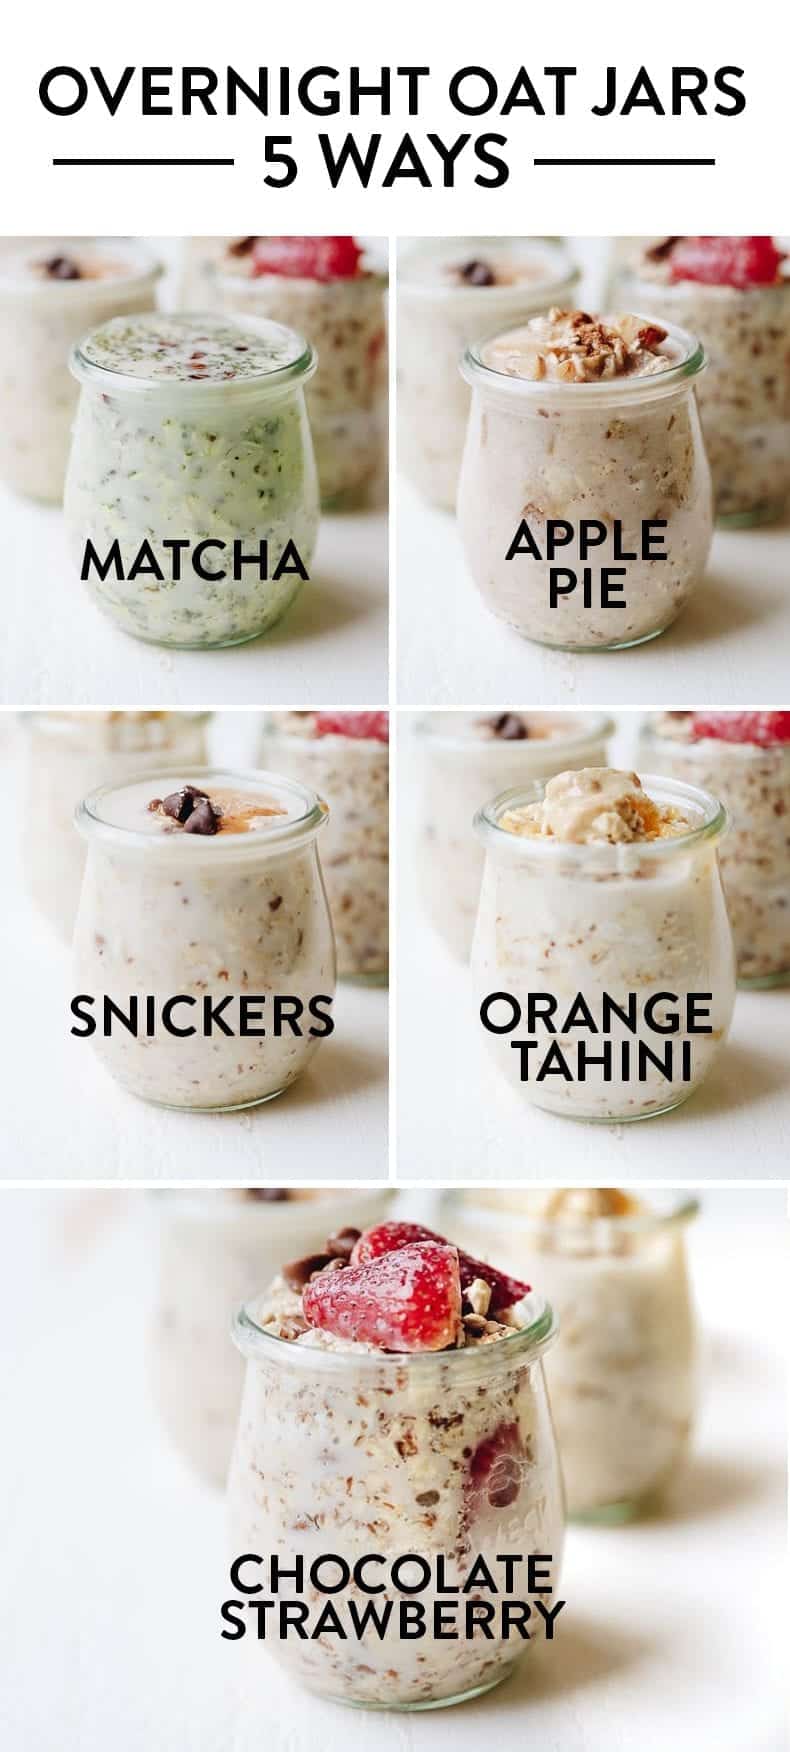 Have you heard of overnight oats? They're an easy, delicious and healthy breakfast that takes 2 minutes to make! I've teamed up with Bob's Red Mill to show you how to make overnight oat jars - 5 ways!